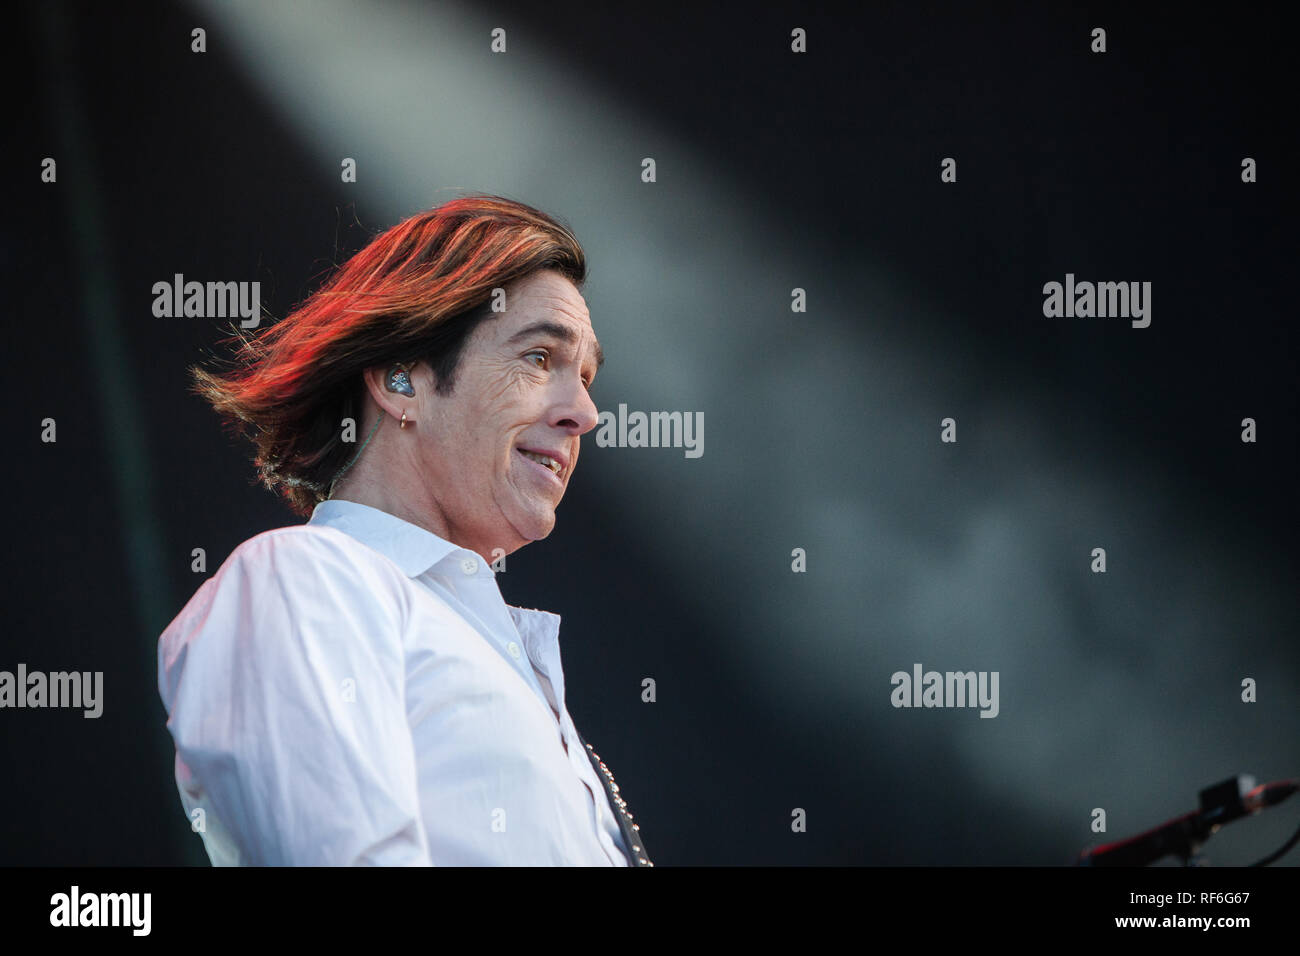 The Swedish pop rock duo Roxette performs a live concert at the Danish music festival Jelling Festival 2015. The duo consists of singer Marie Fredriksson and musician Per Gessle (pictured). Denmark, 23/05 2015. EXCLUDING DENMARK. Stock Photo